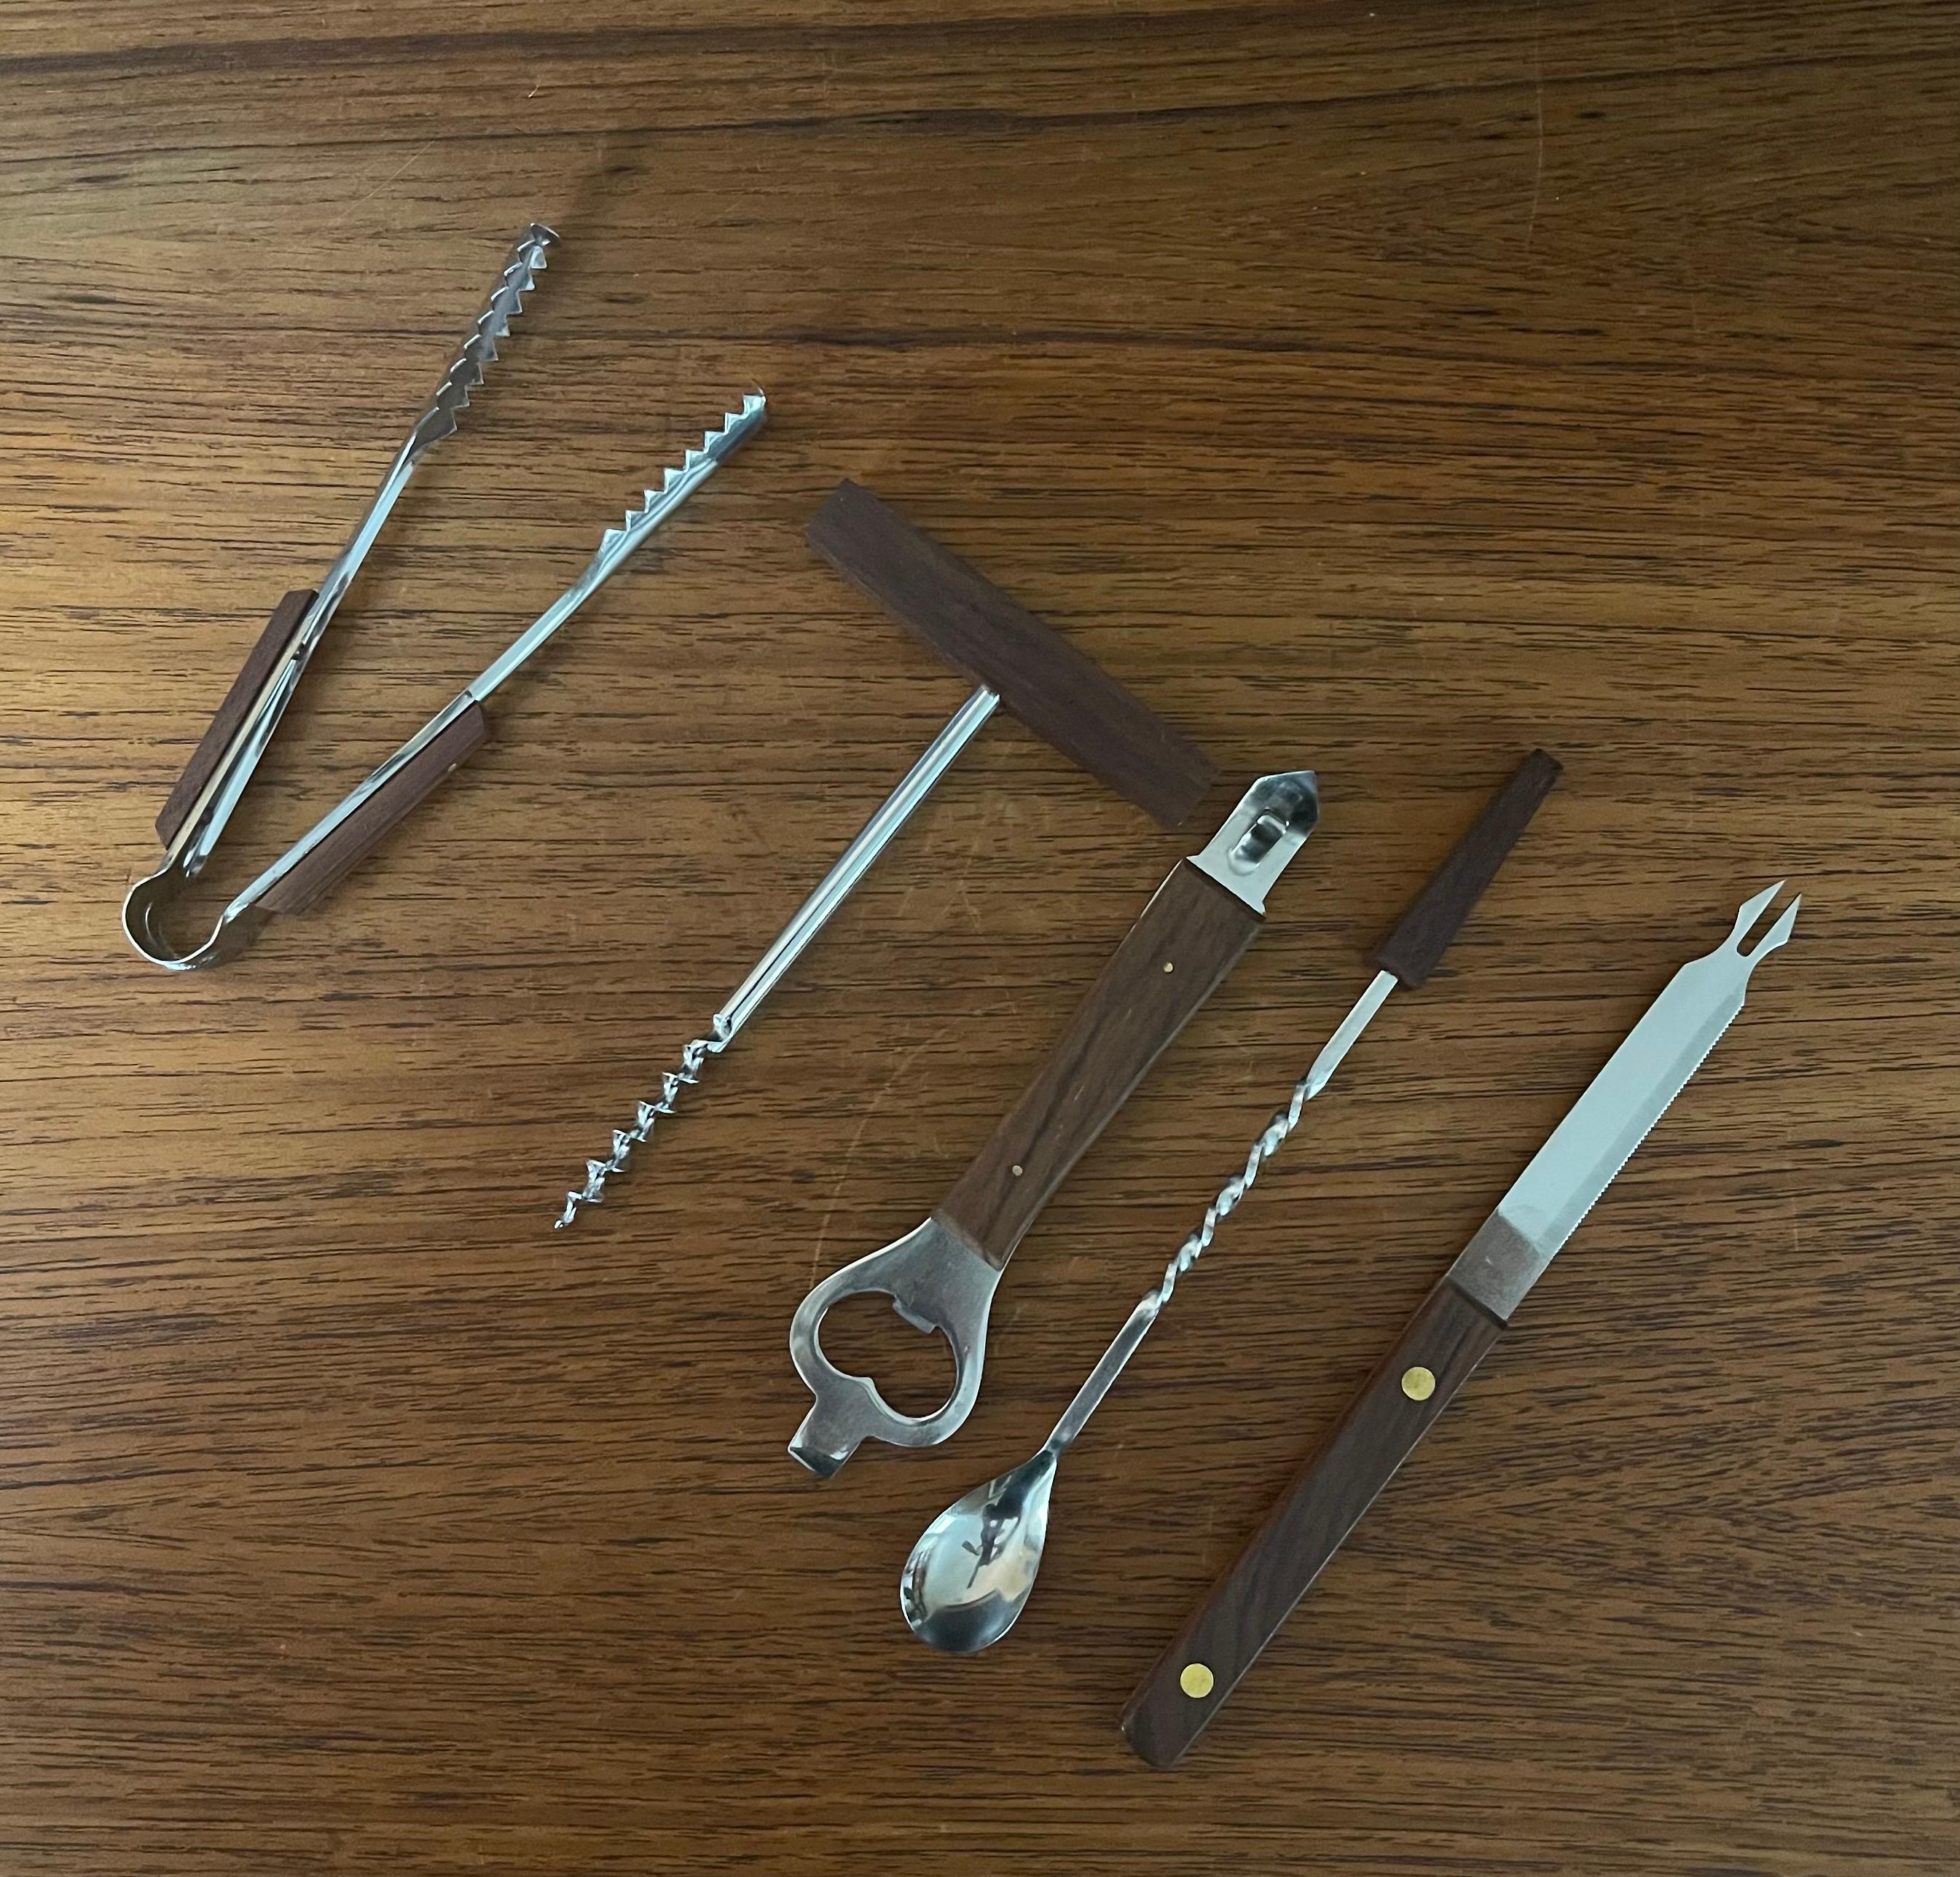 Set of five MCM walnut & stainless steel barware tools, circa 1970s. The set includes a bottle/ can opener, wine cork screw, ice tongs, stir stick and a citrus knife all made of stainless steel with walnut. The tools are in very good condition and